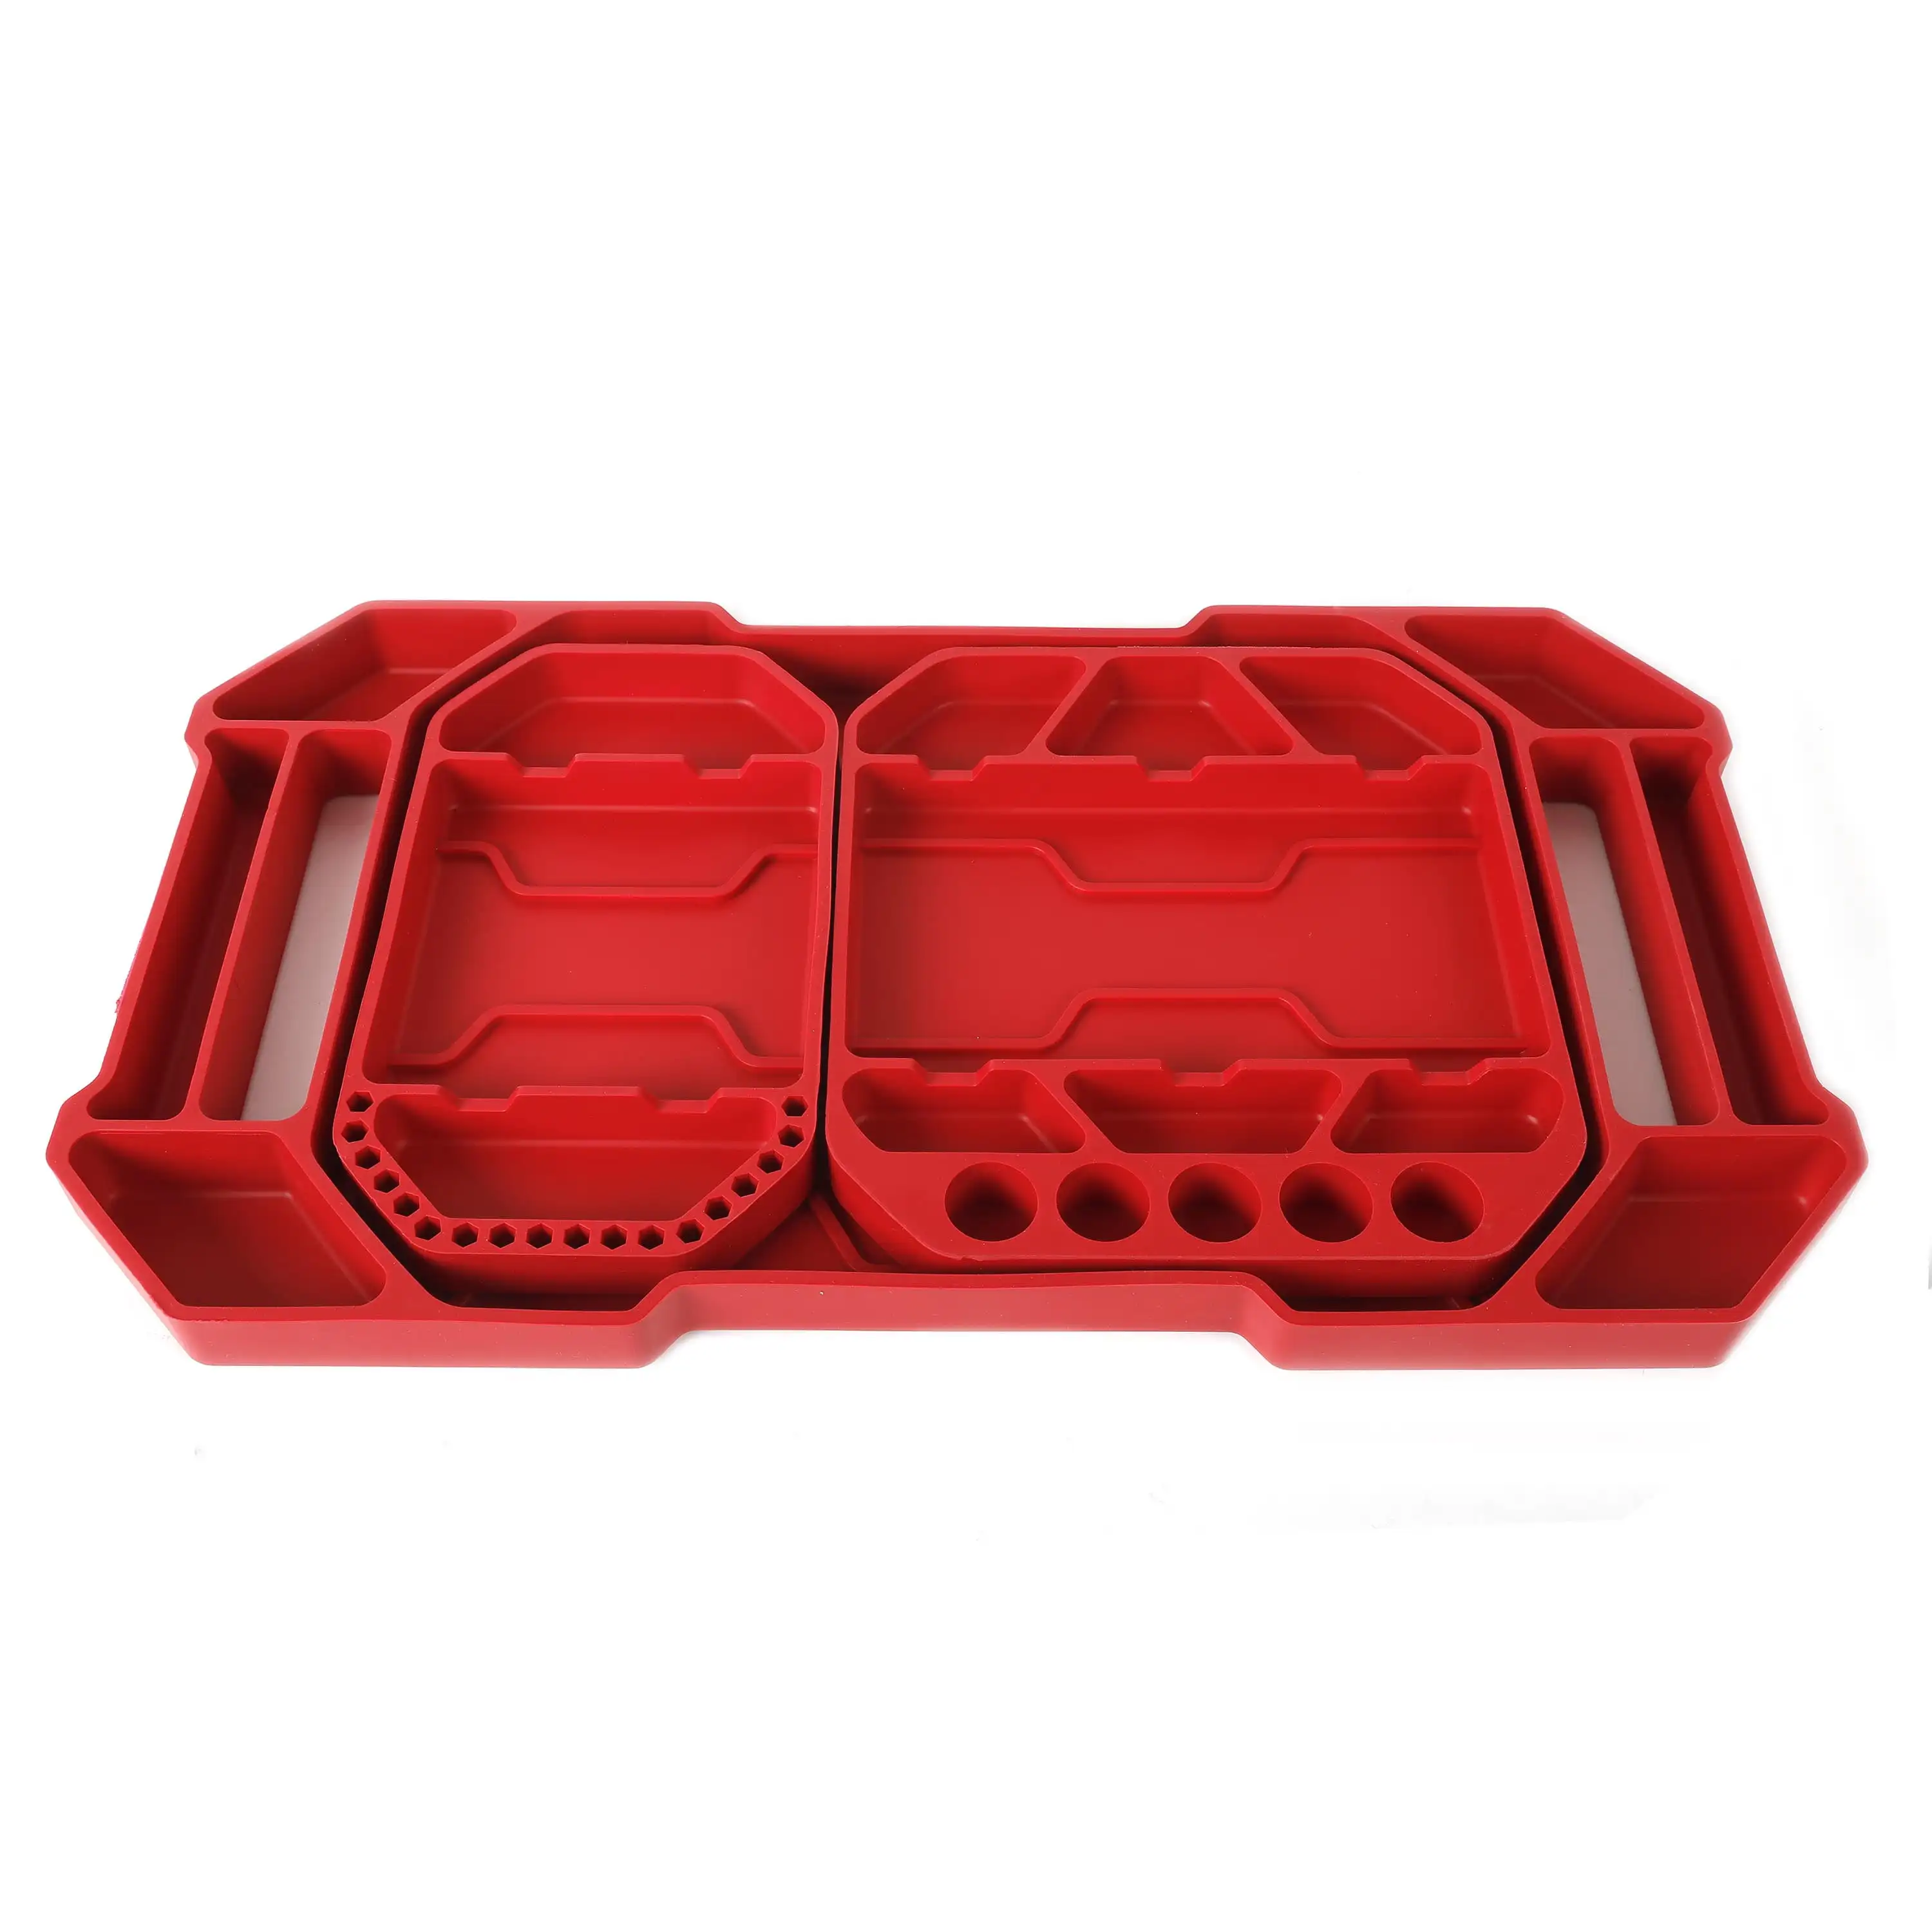 hyper-tough-3-piece-silicone-tool-organizer-tray-flexible-red-automotive-use-new-heat-resistant-up-to-400-f